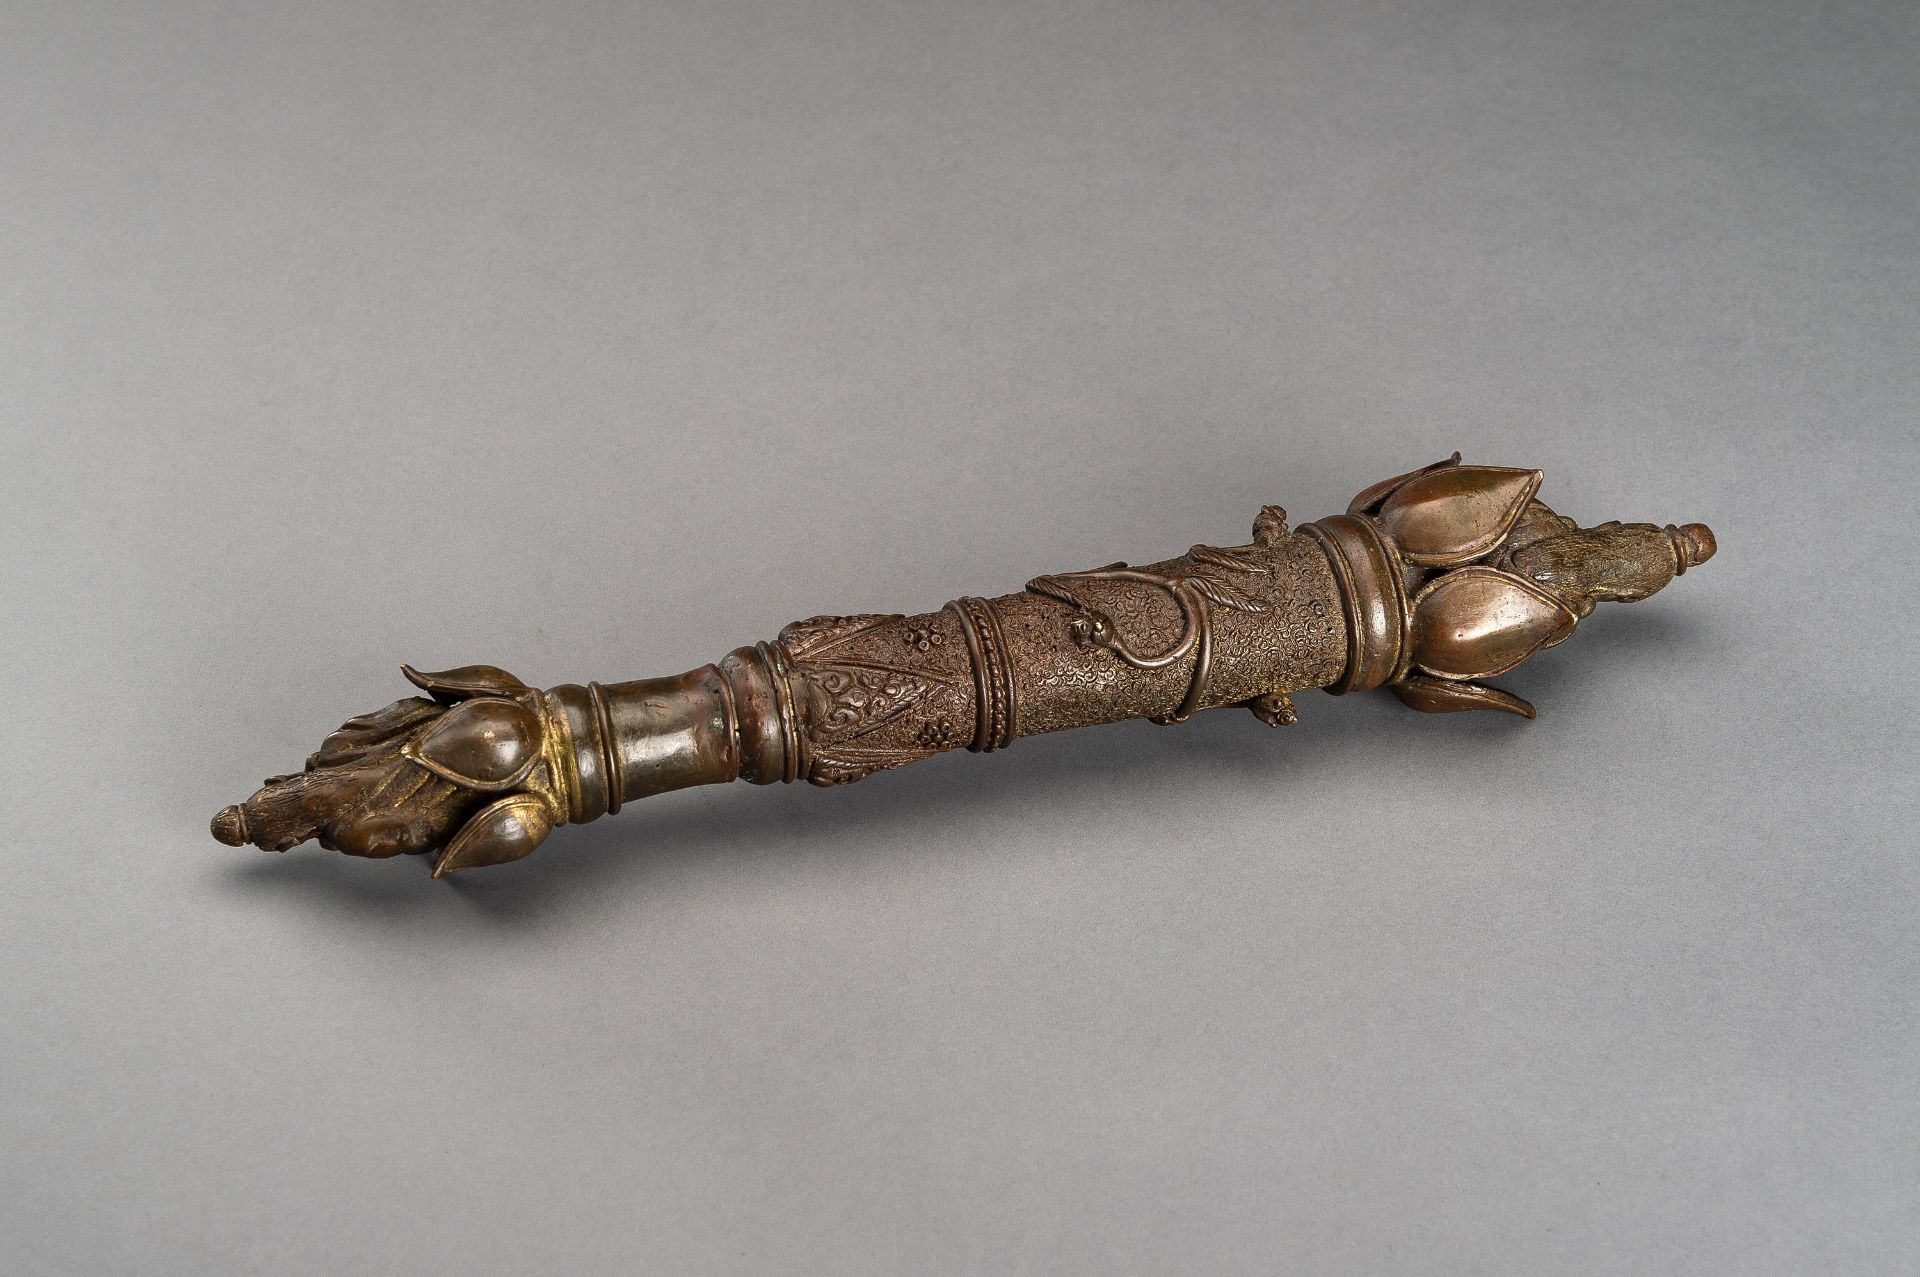 A LARGE AND UNUSUAL BRONZE CEREMONIAL SCEPTER - Image 8 of 11